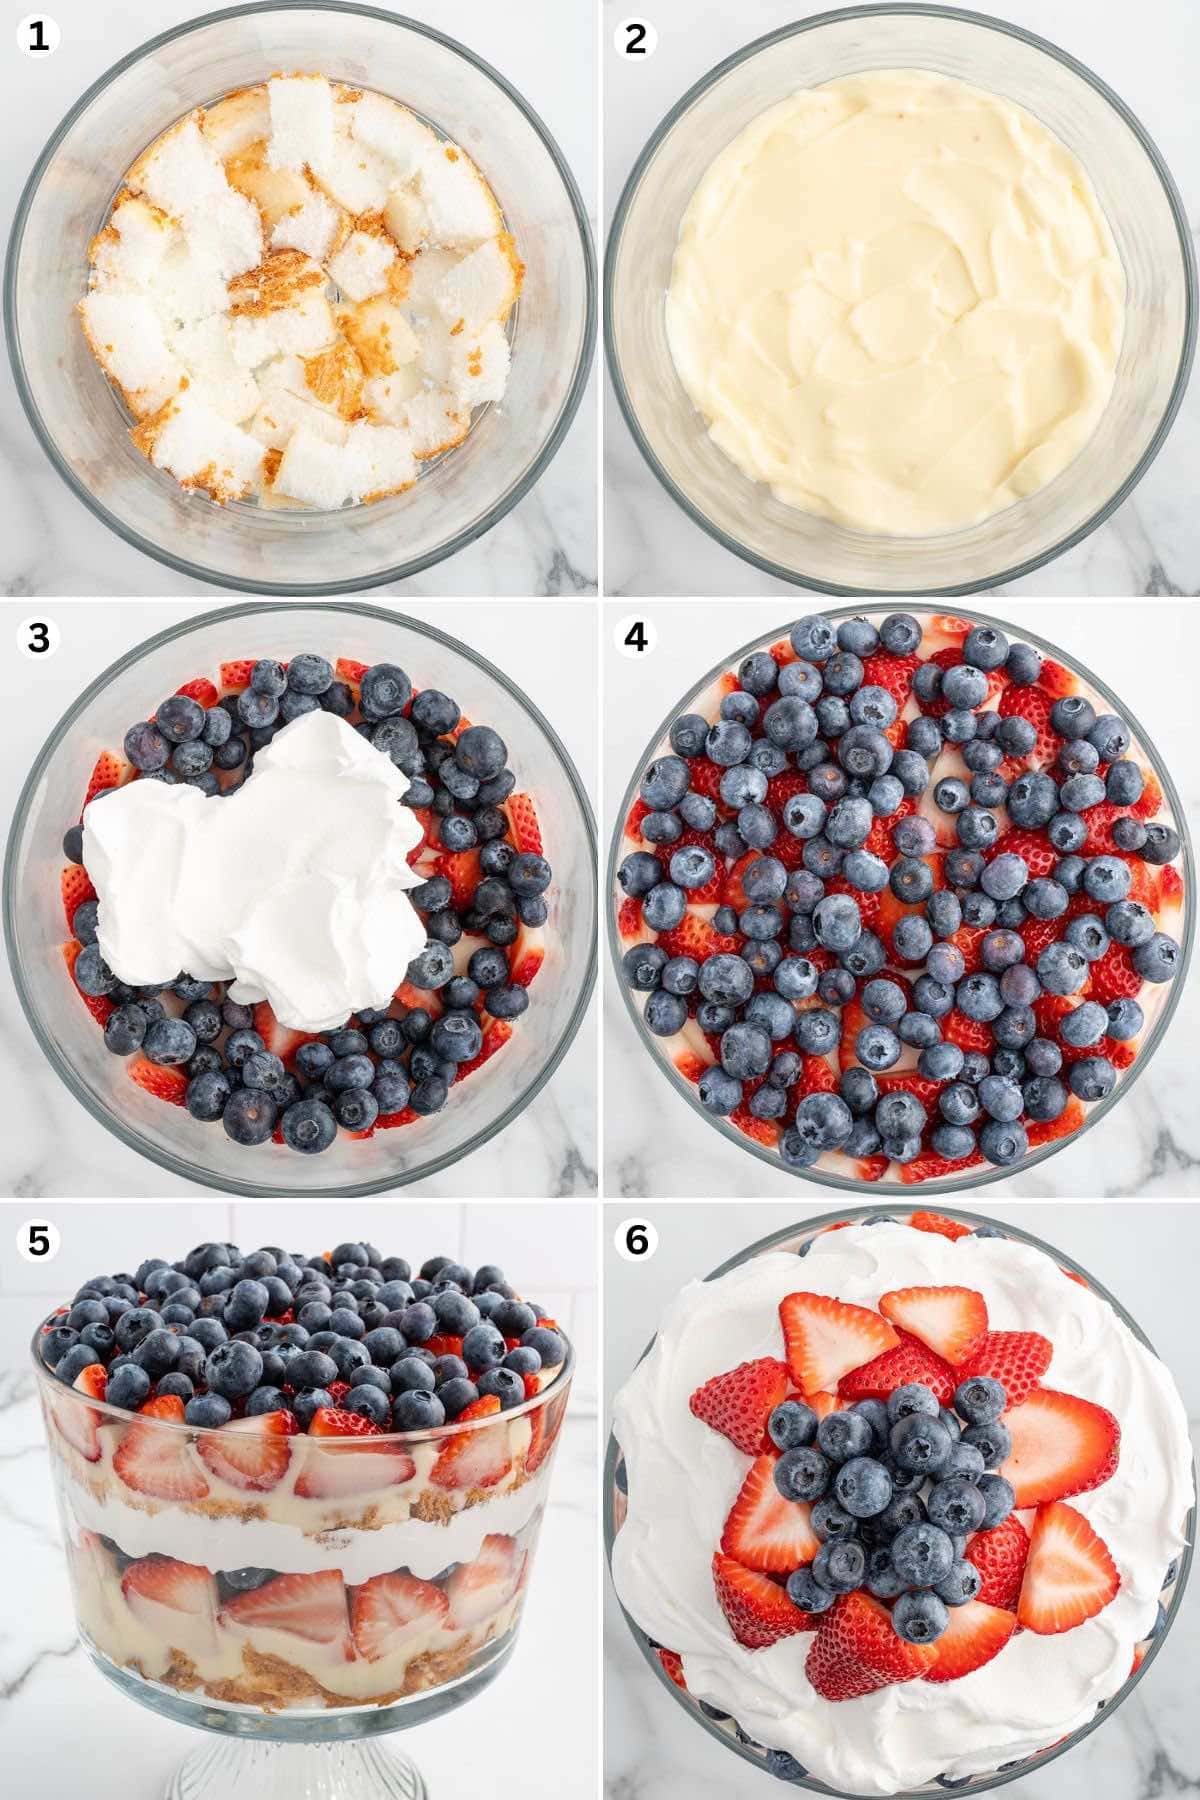 Create a single layer of cake cubes at the bottom of the trifle bowl. Spoon half of the white chocolate pudding over the cake cubes. Add a single layer of sliced strawberries and blueberries over the pudding. Spread 1 of the containers of thawed whipped topping over the berries. Repeat the layers. Finish with whipped topping then decorate with sliced strawberries and blueberries.